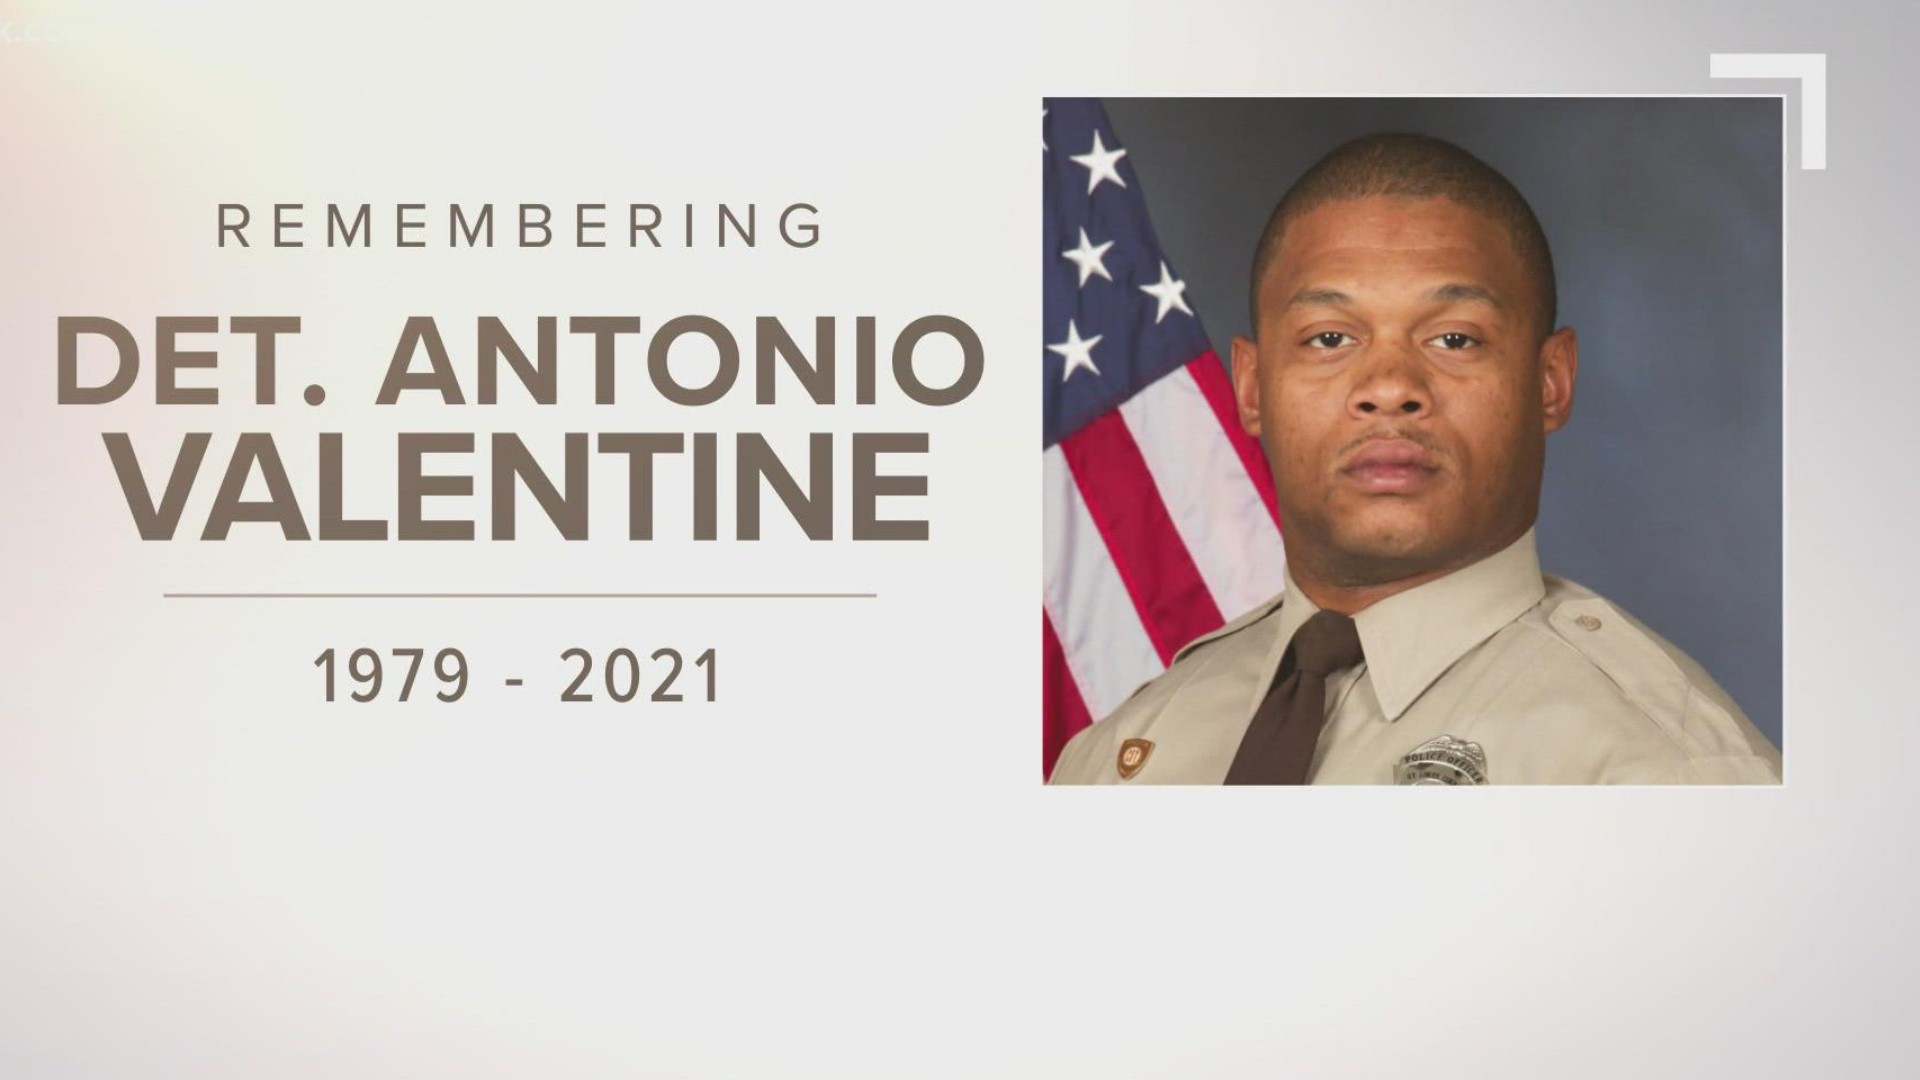 The St. Louis community will pay their respects to a fallen officer and veteran on Thursday. Detective Antonio Valentine was killed in a crash last week.